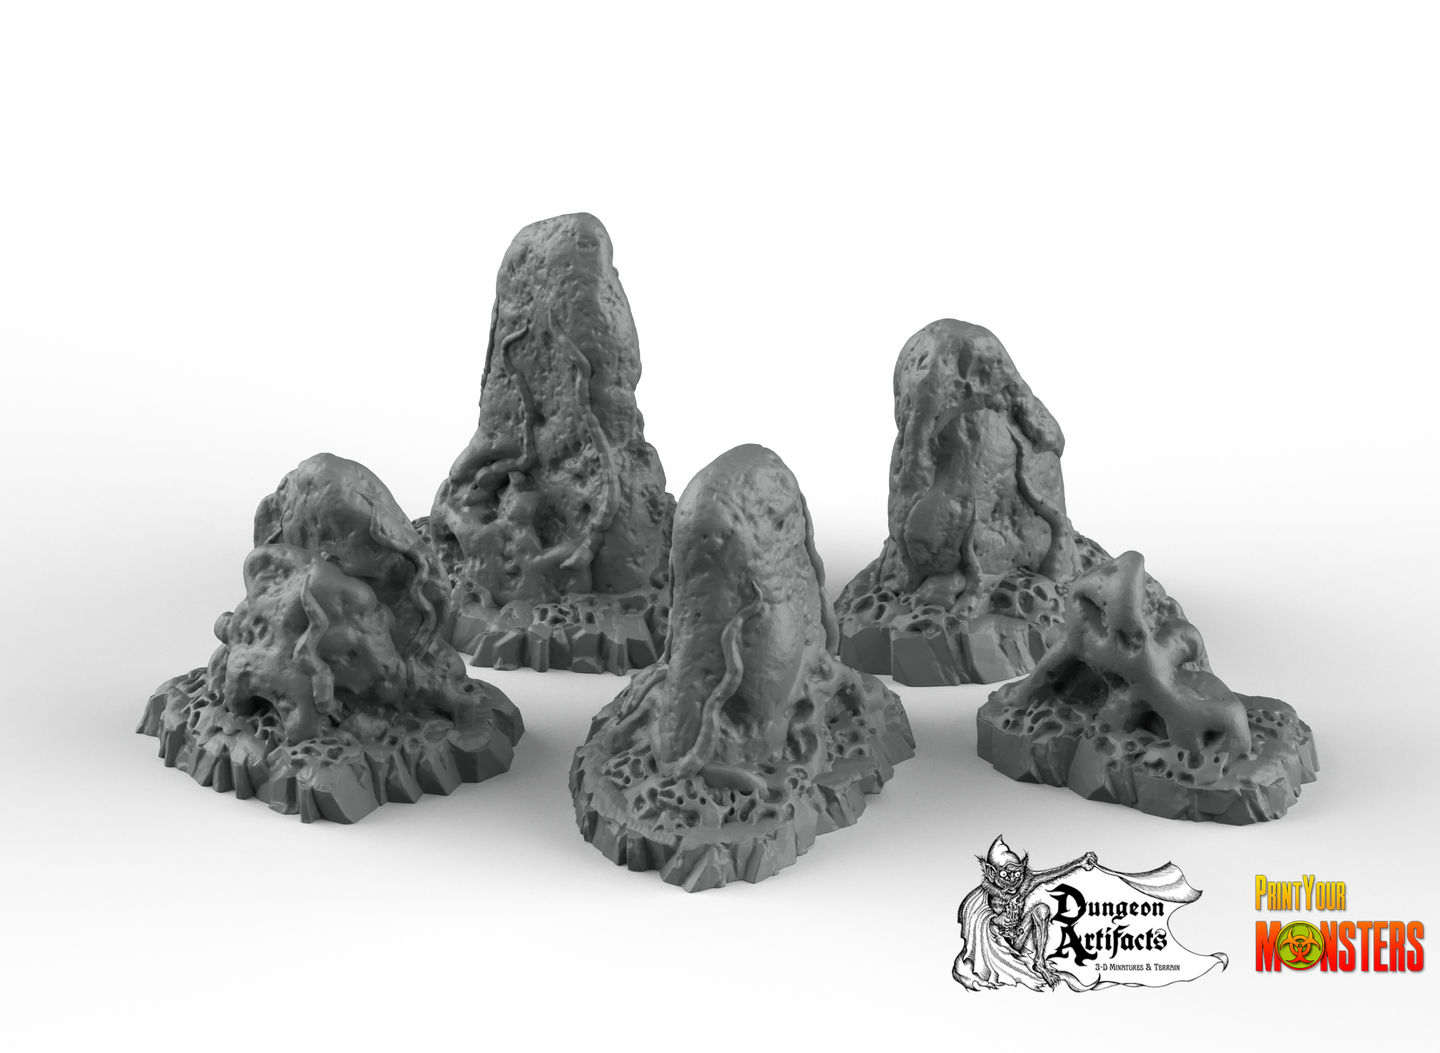 War of the World Stones - Fantastic Plants and Rocks Vol. 2 - Print Your Monsters - Wargaming D&D DnD